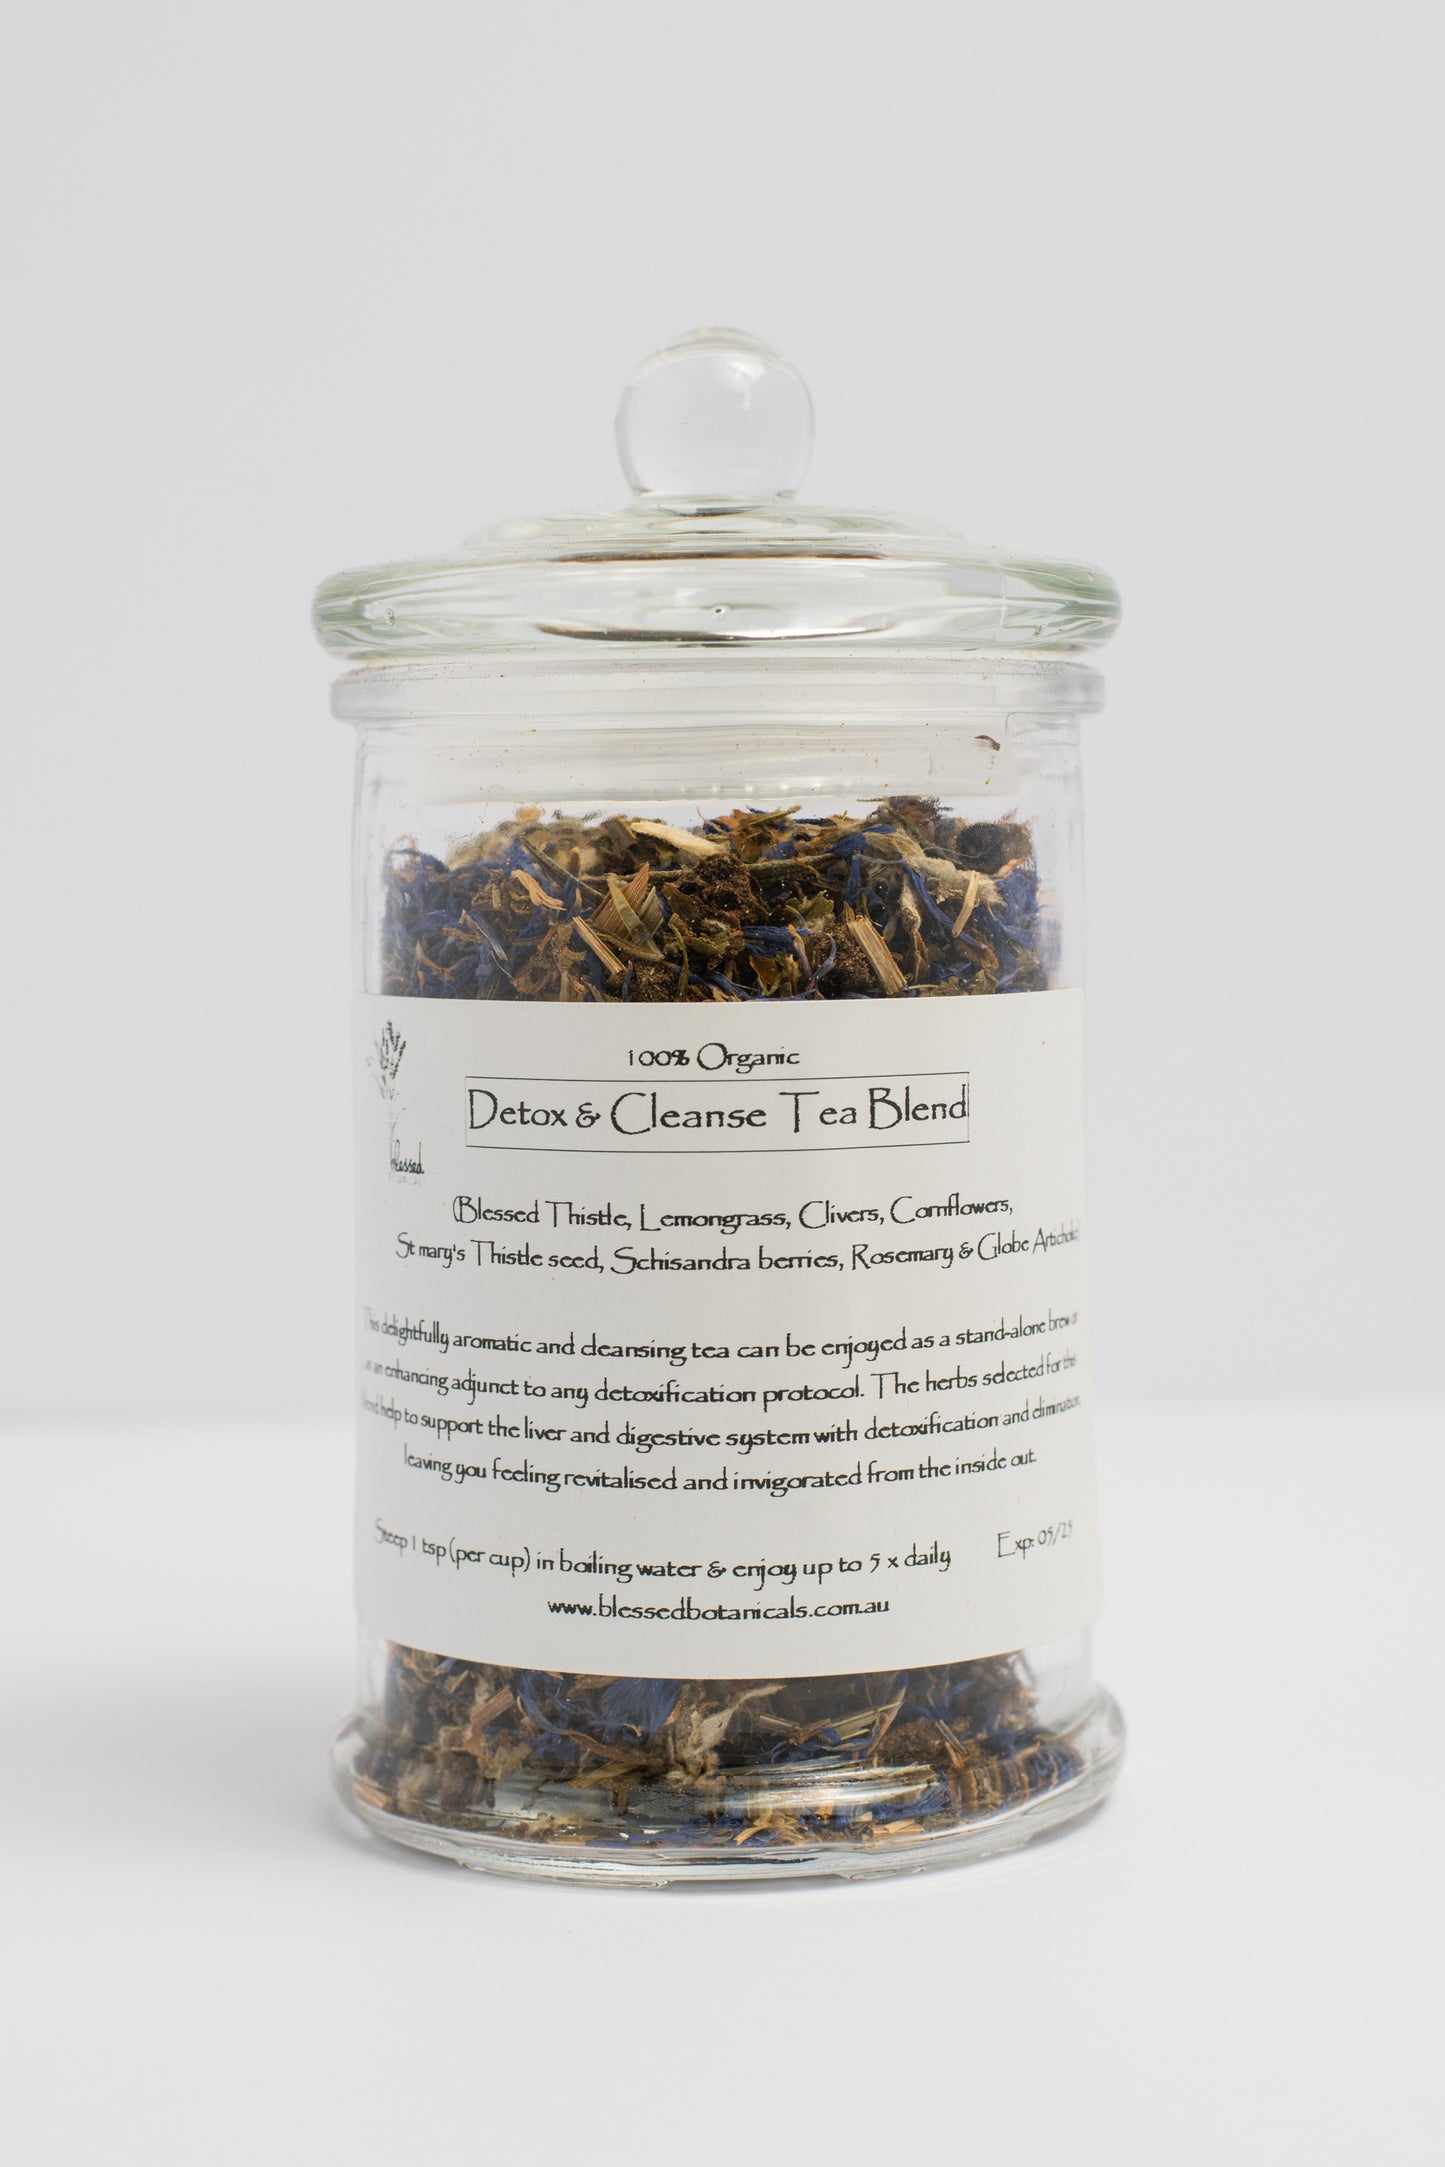 bespoke herbal tea, infusion, tissane, small batch, bespoke, artisan, dried herbs, herbal medicine, made to order, tailor made, organic tea blend, detox and cleanse, blood cleansing, alterative, liver support, detoxification, kidney health, digest, digestion, nervous system support. Blessed Thistle, Rosemary, Globe Artichoke leaf, Schisandra berries, Milk Thistle seed, Clivers, Cornflowers, Lemongrass. Invigorating, Revitalised. Apothecary glass jar.